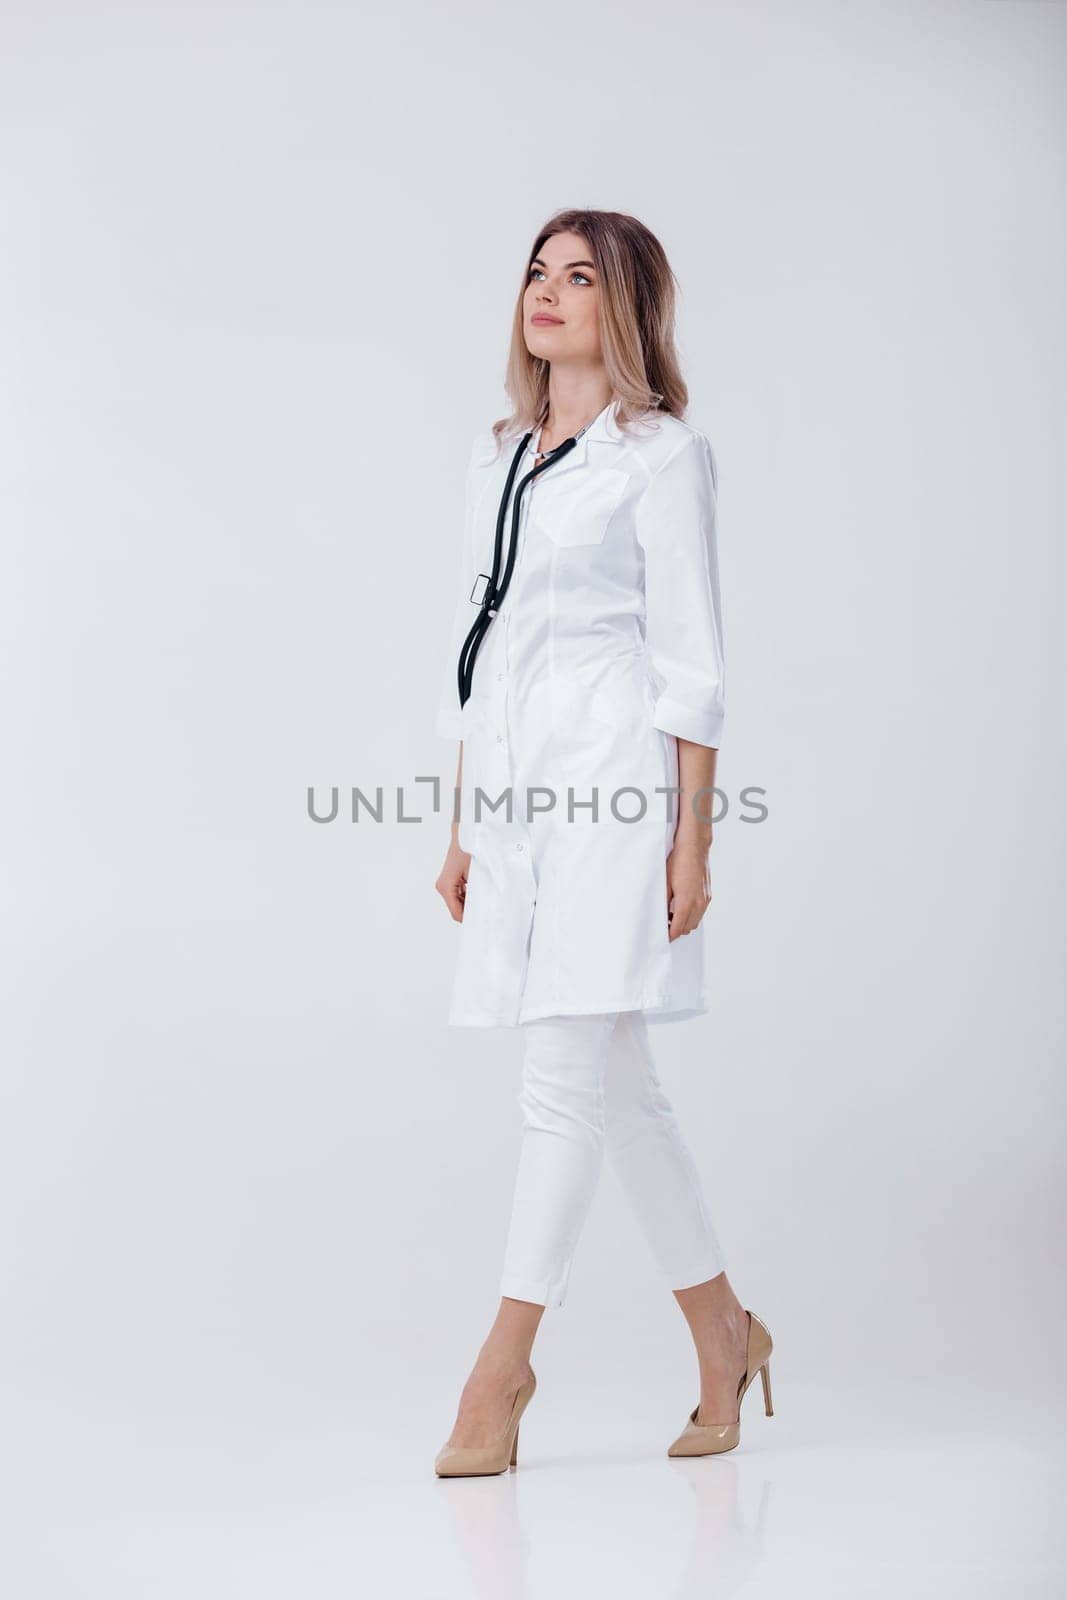 doctor woman in white coat with stethoscope by erstudio